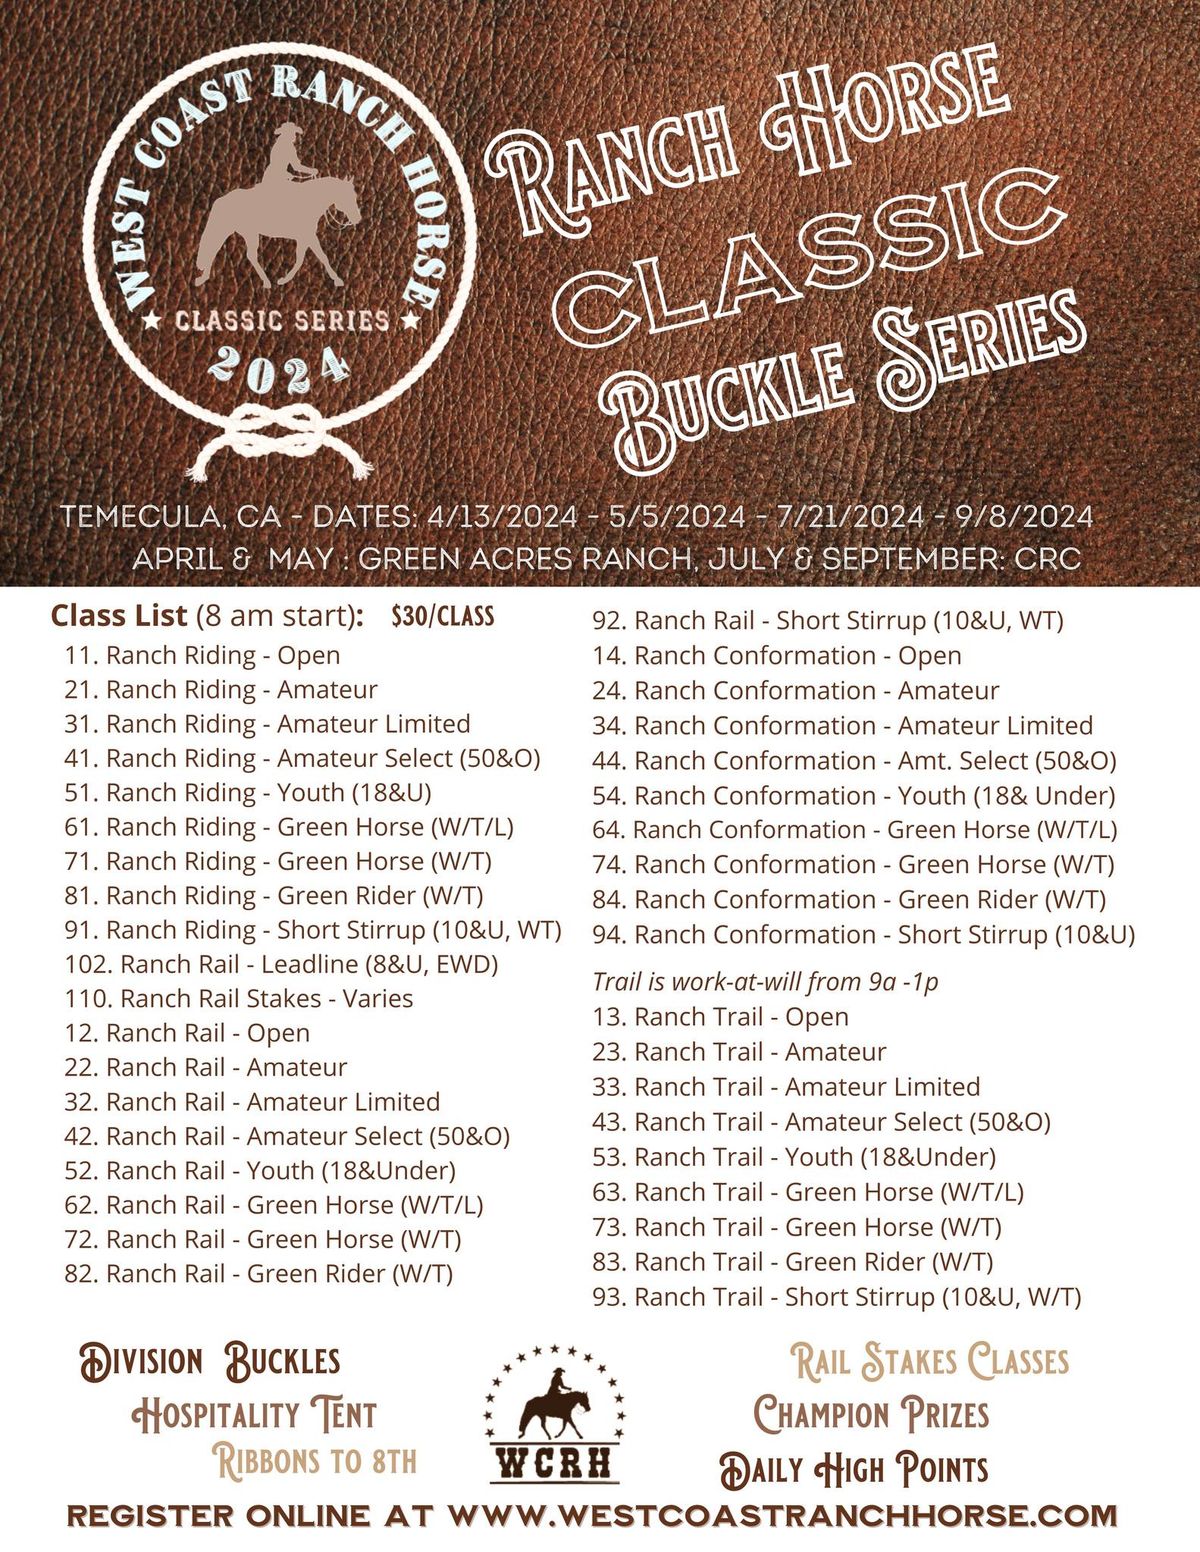 Ranch Horse Classic Buckle Series Show #3 (West Coast Ranch Horse)